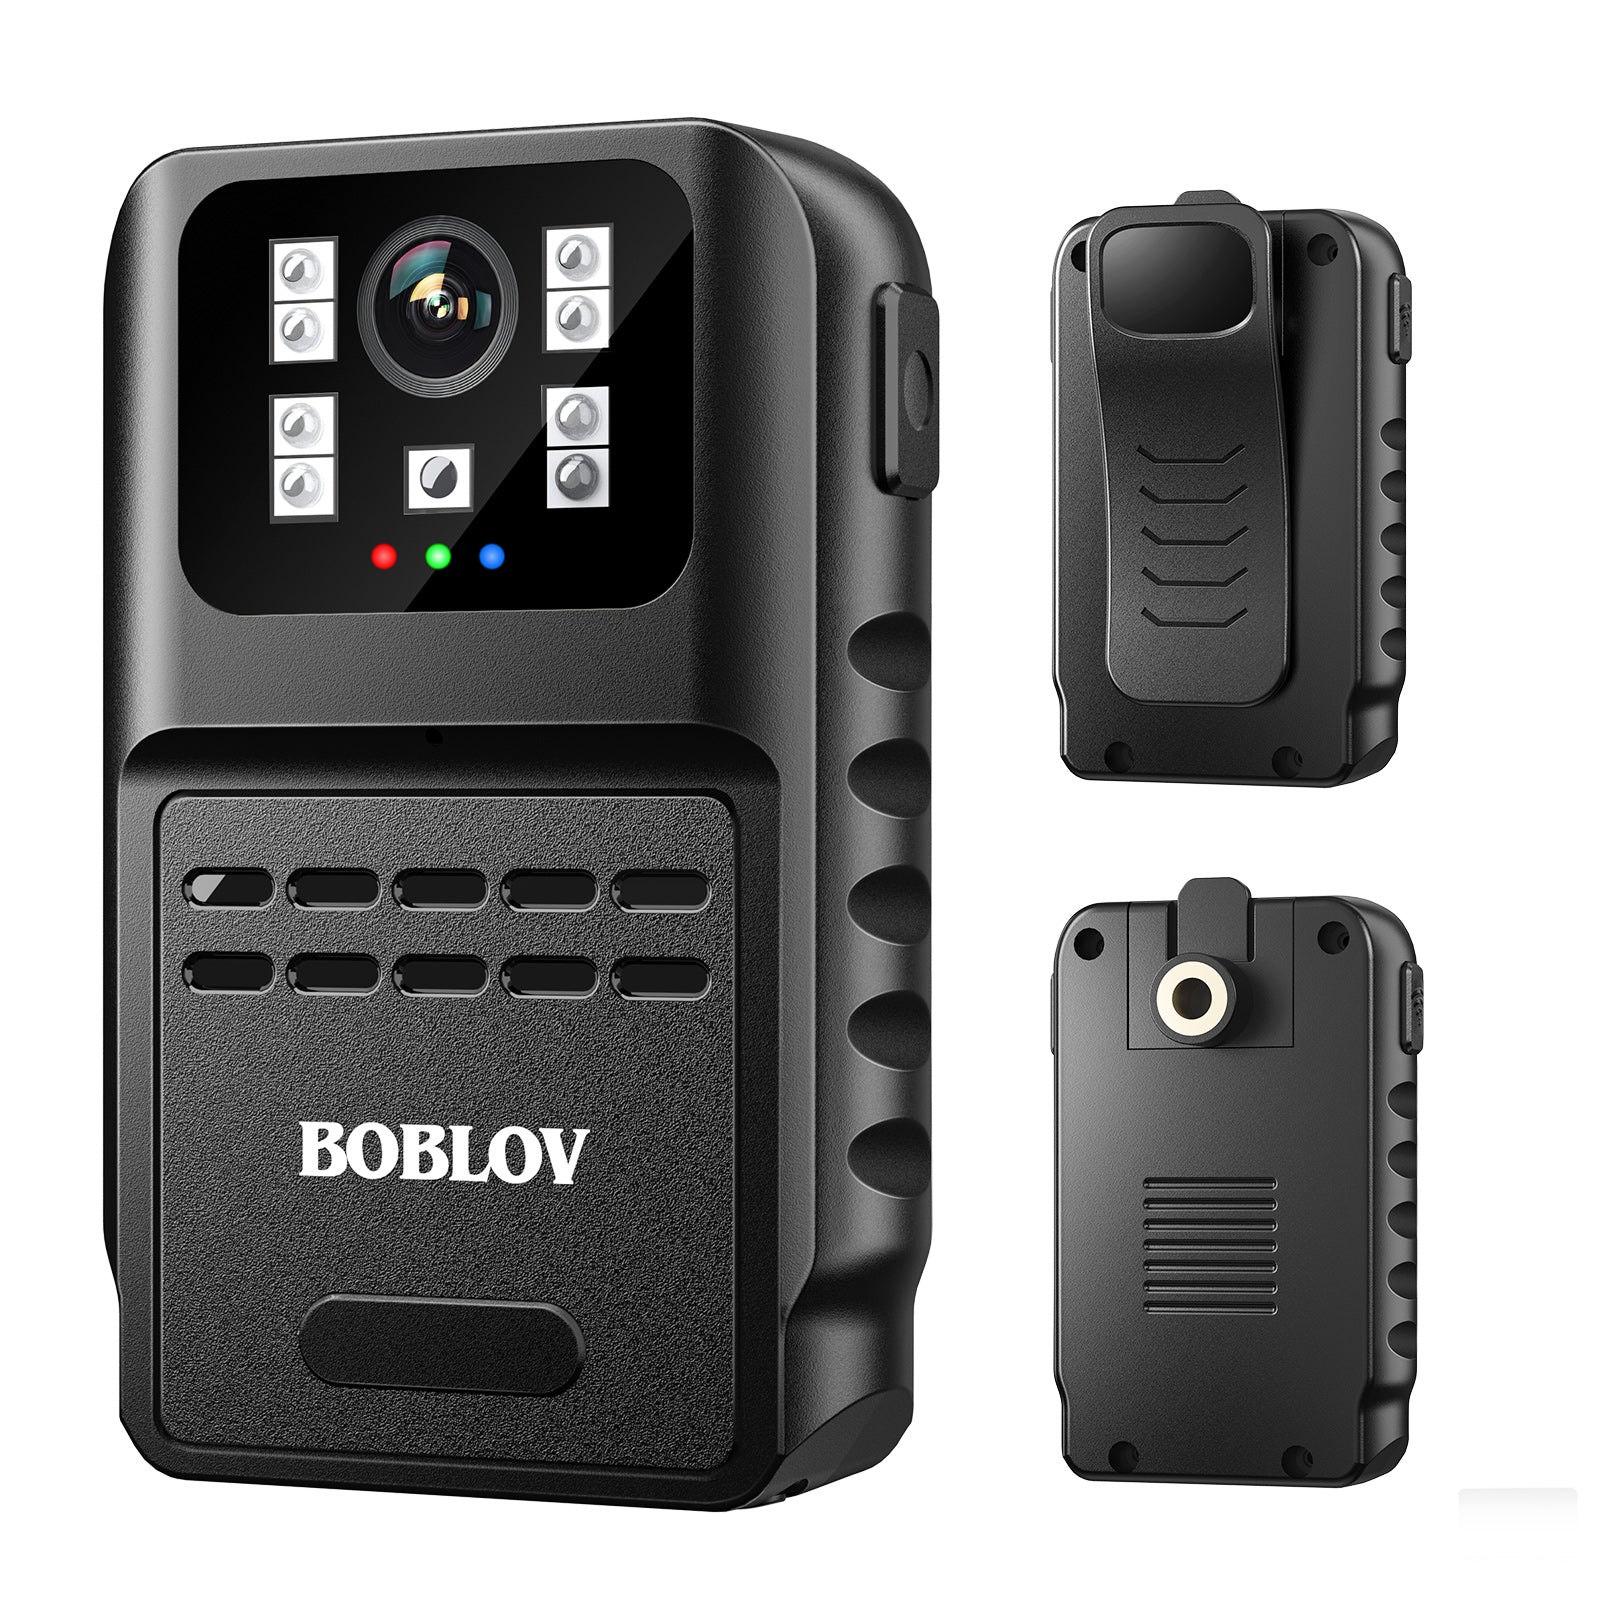 880W small body camera with 1080P resolution and night vision feature7